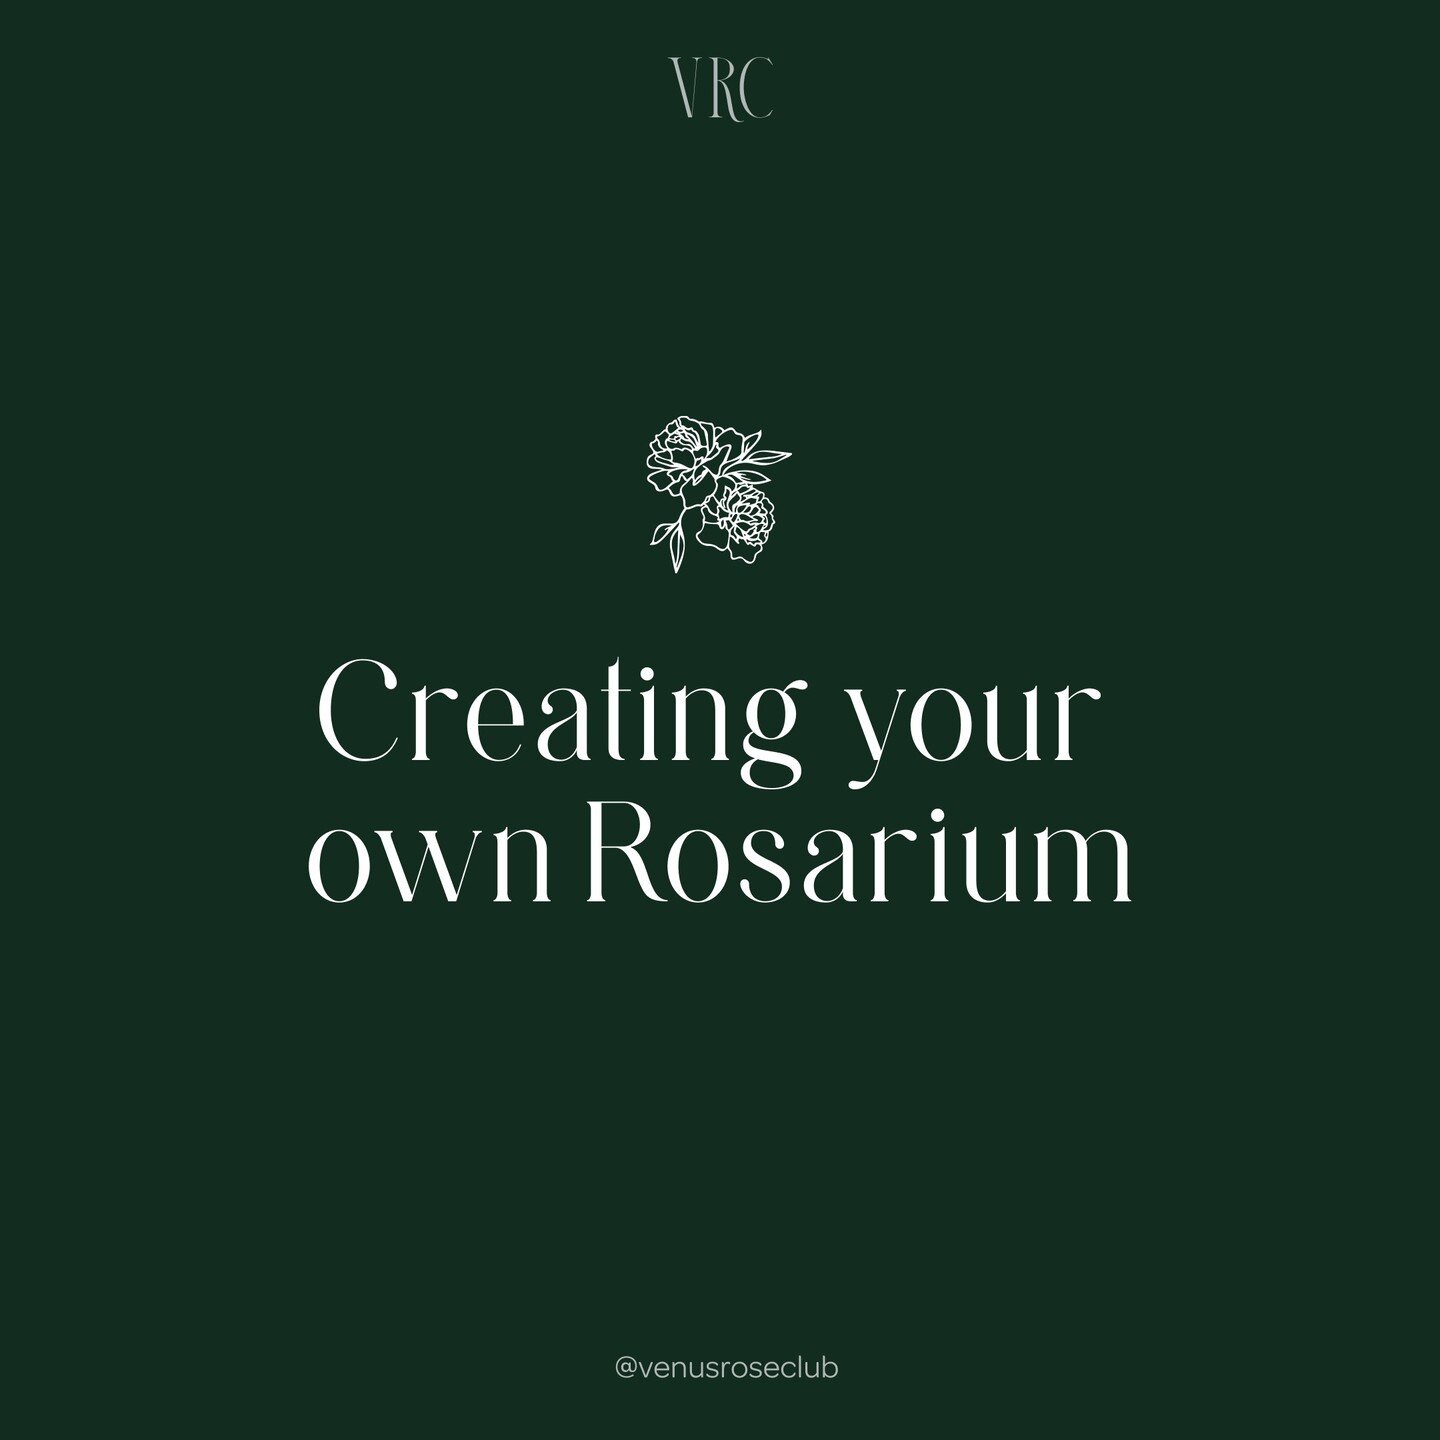 🏵️ Creating your  own Rosarium

The Rosarium is VRCs latest co-creation with garden-witch and Piscean poet, @louhowarth64 .

Together, we&rsquo;re blending an alchemy of the gifts Celestial Earth generously offers to us: herbalism, archetypal energi